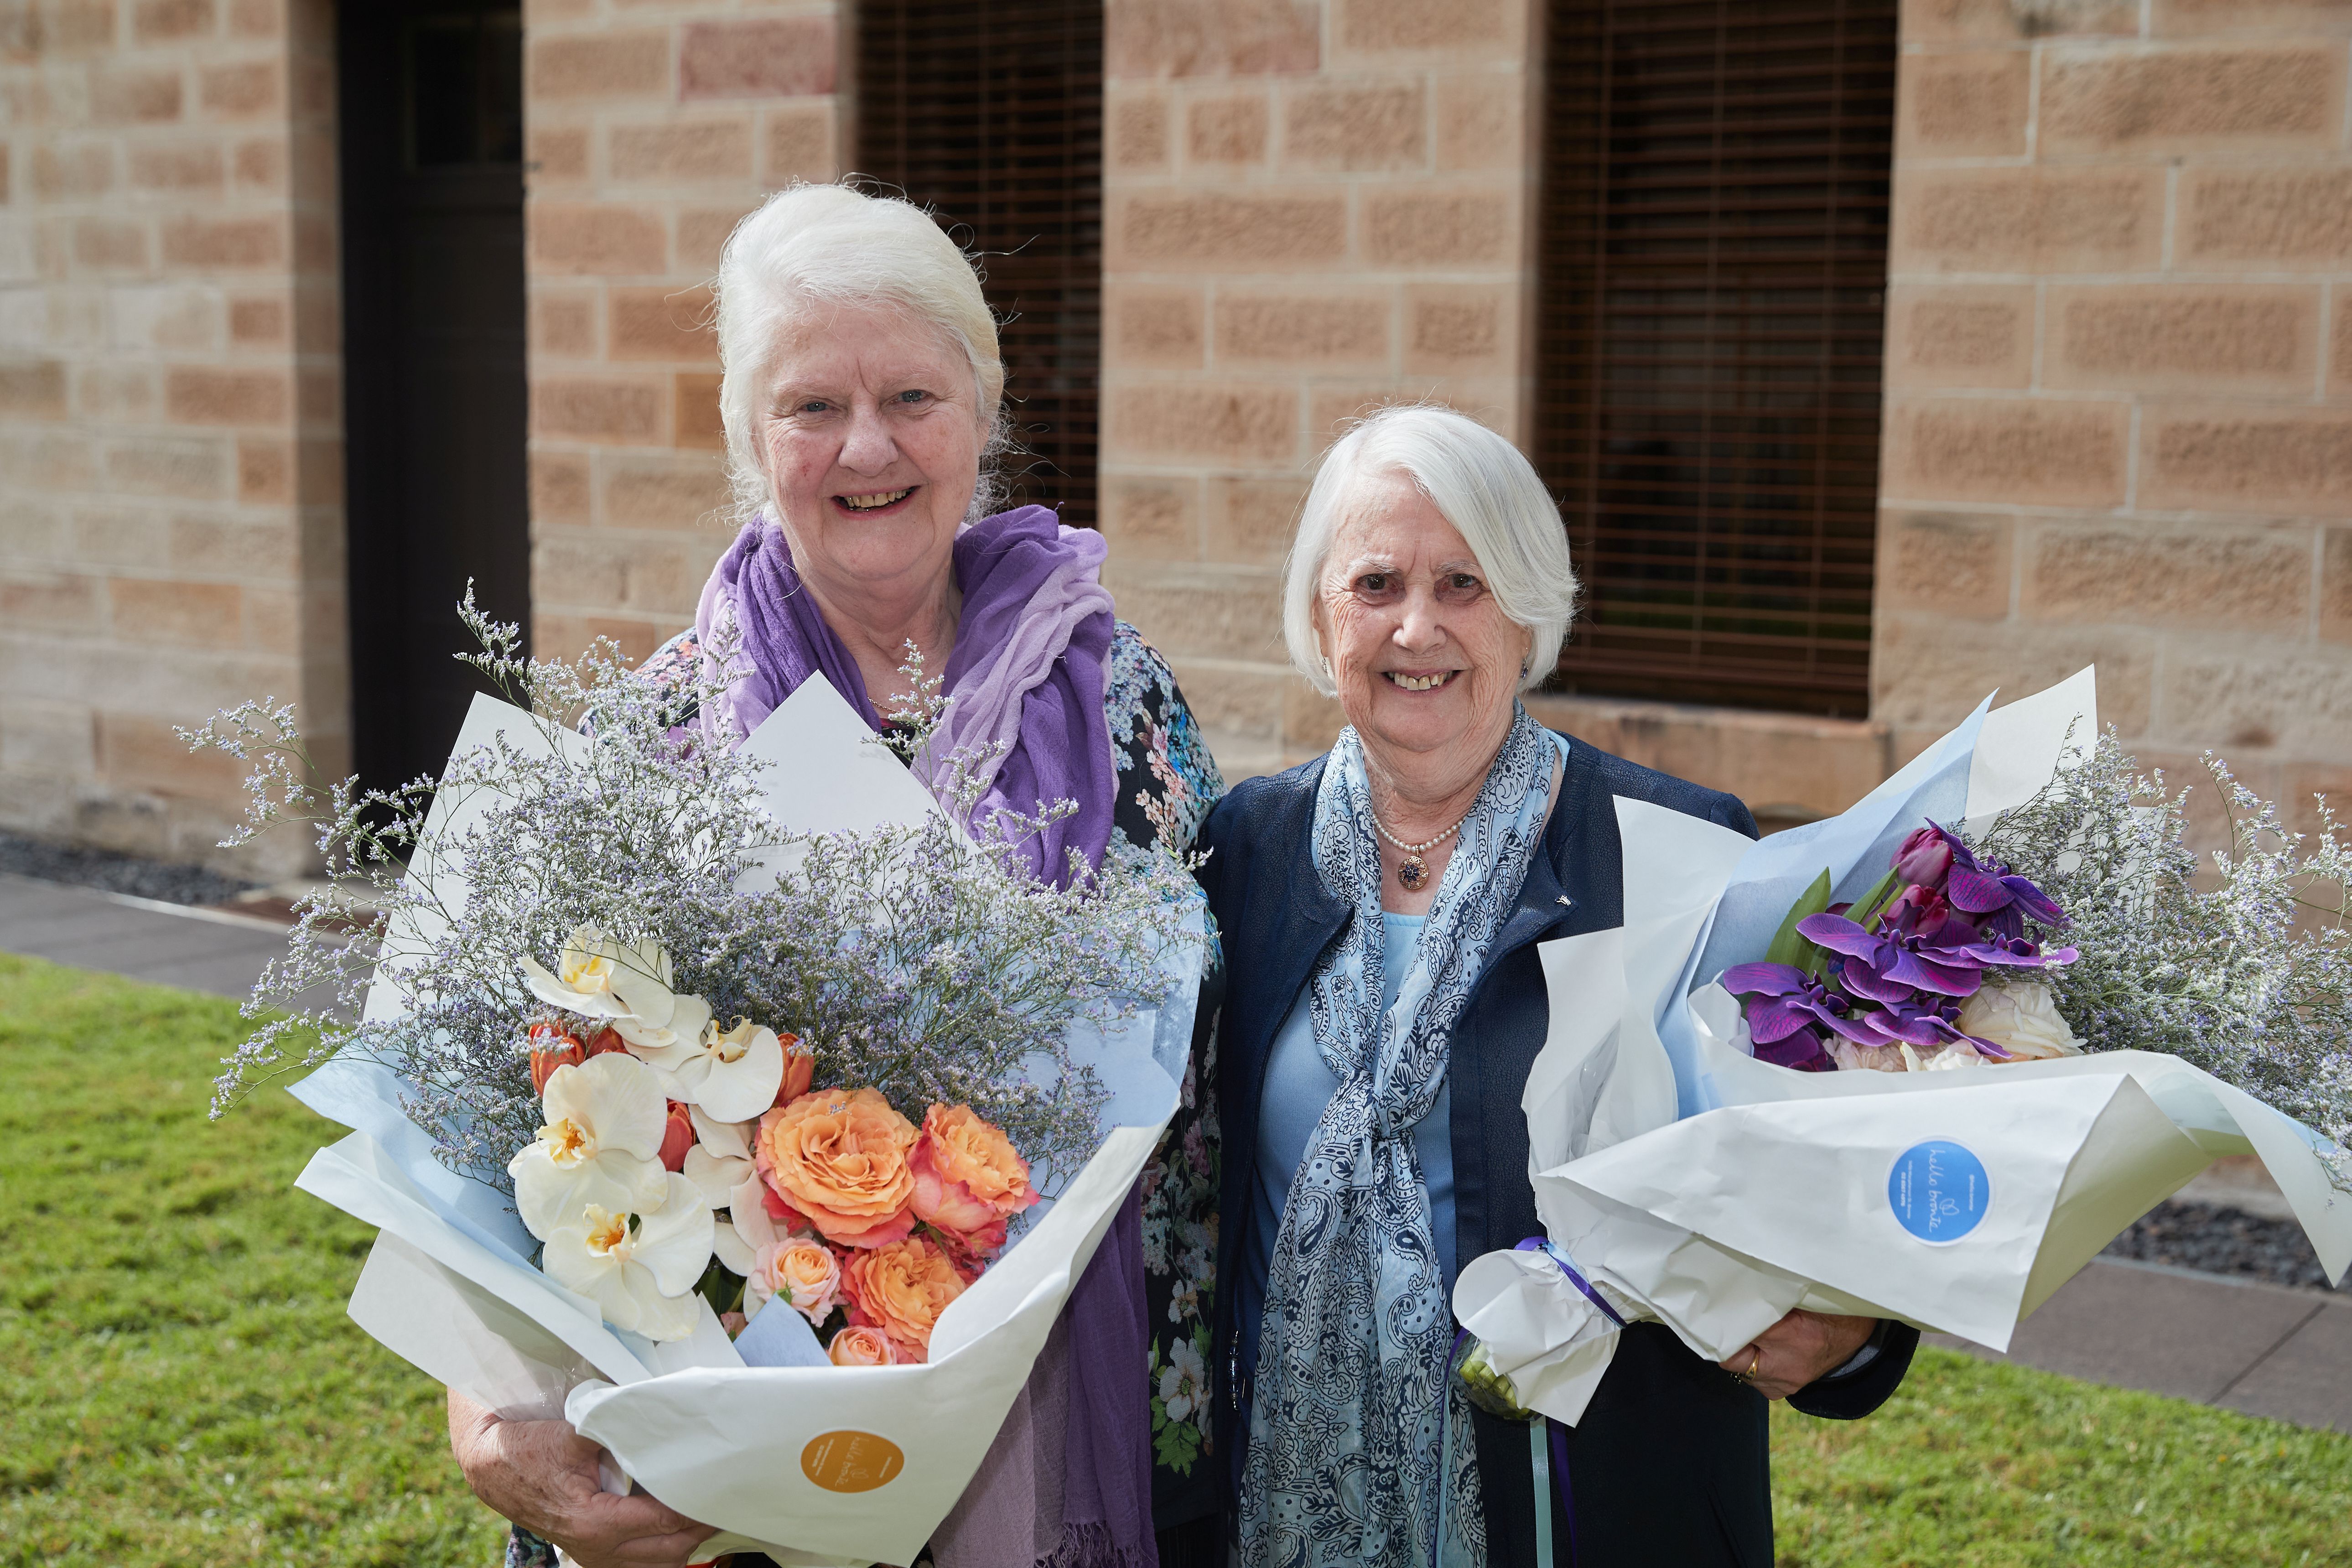 Volunteers Laraine (left) and Elaine (right) each holding a bunch of flowers